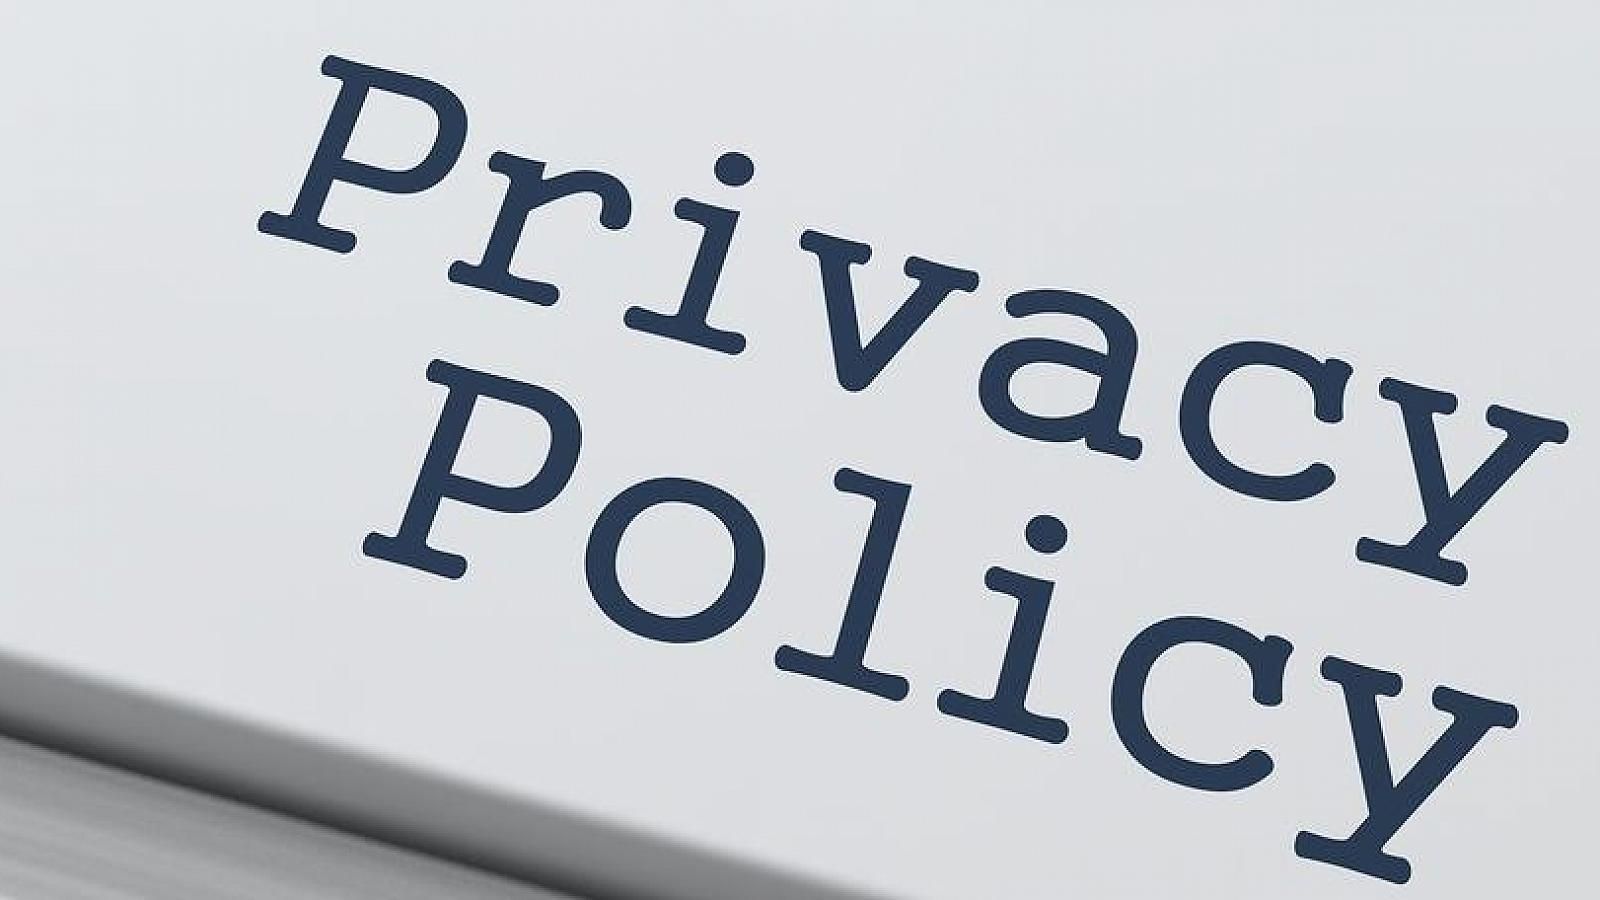 Privacy Policy Love Image Wallpaper